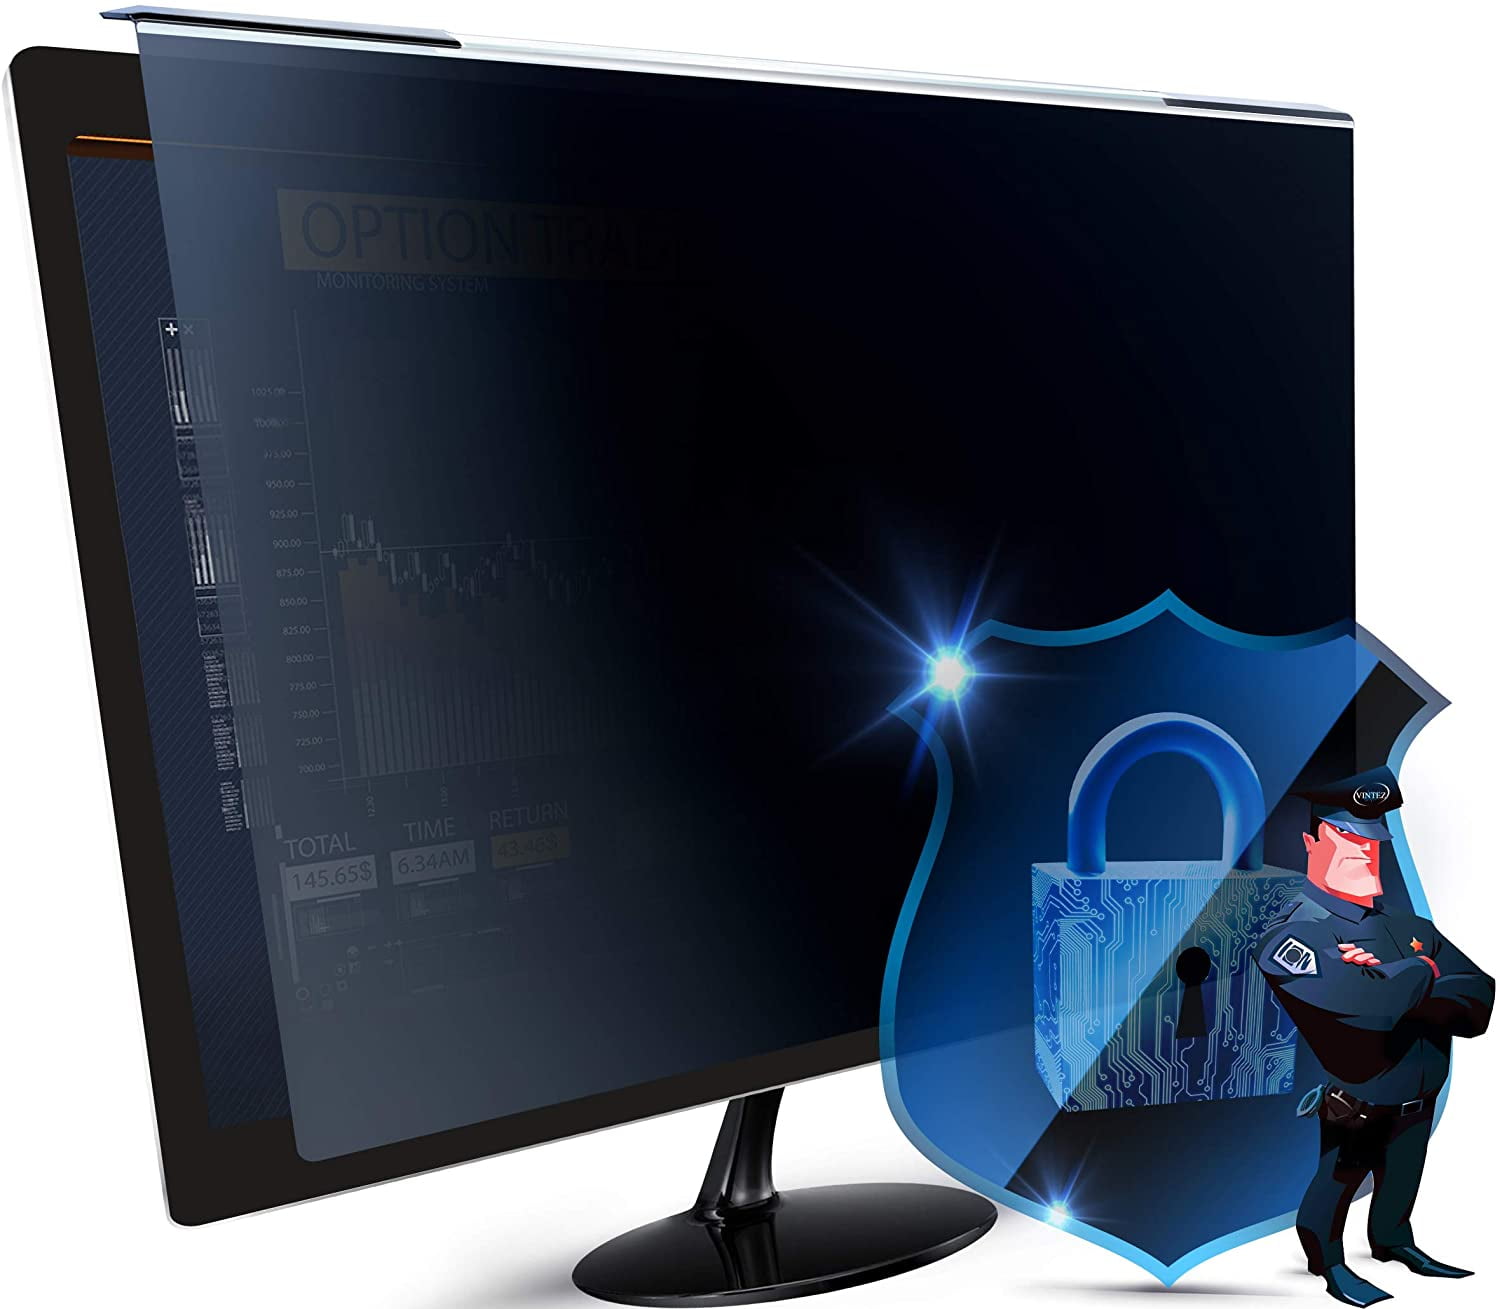 Hanging Privacy Screen Filter for Widescreen Monitors 17.3 Inch to 19.5 Inch 16:9/16:10 Aspect Ratio 17.3,18.5,19,19.5 